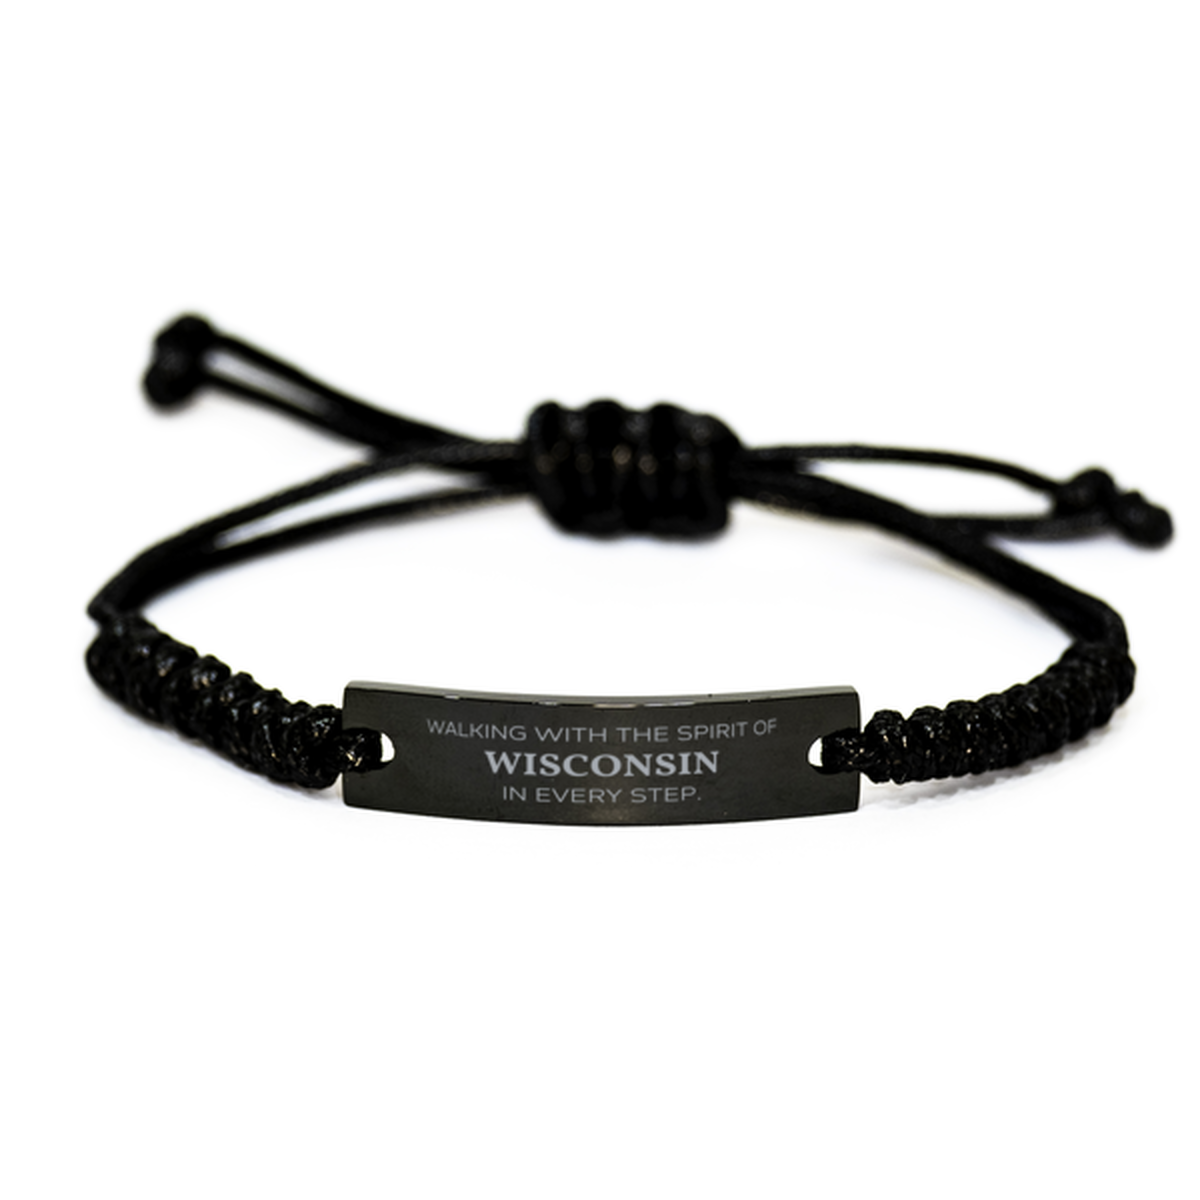 Wisconsin Gifts, Walking with the spirit, Love Wisconsin Birthday Christmas Black Rope Bracelet For Wisconsin People, Men, Women, Friends